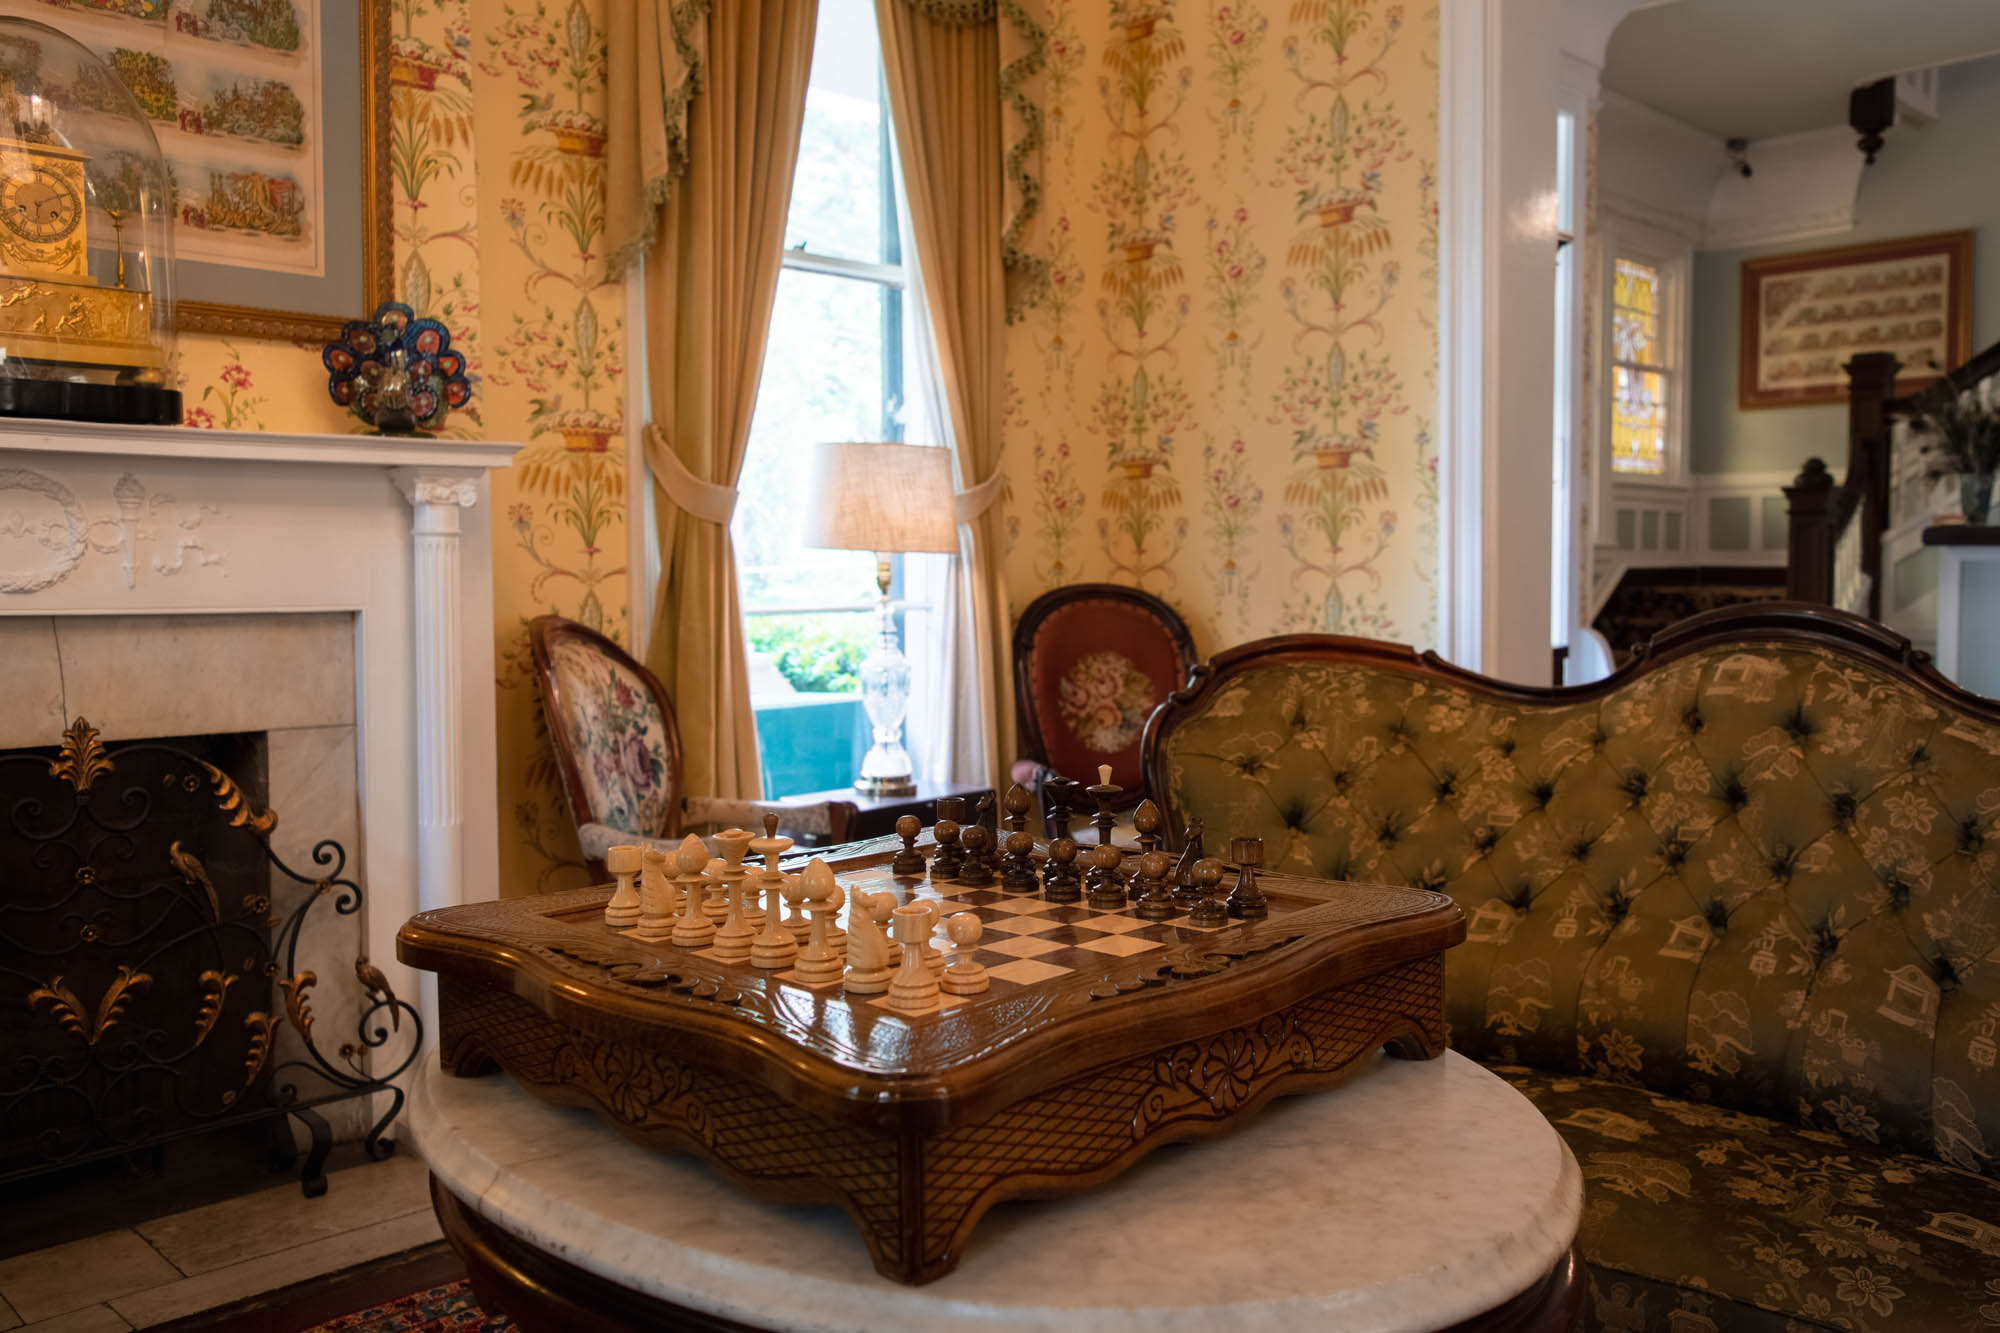 Chess board in front room at a hotel in New Orleans